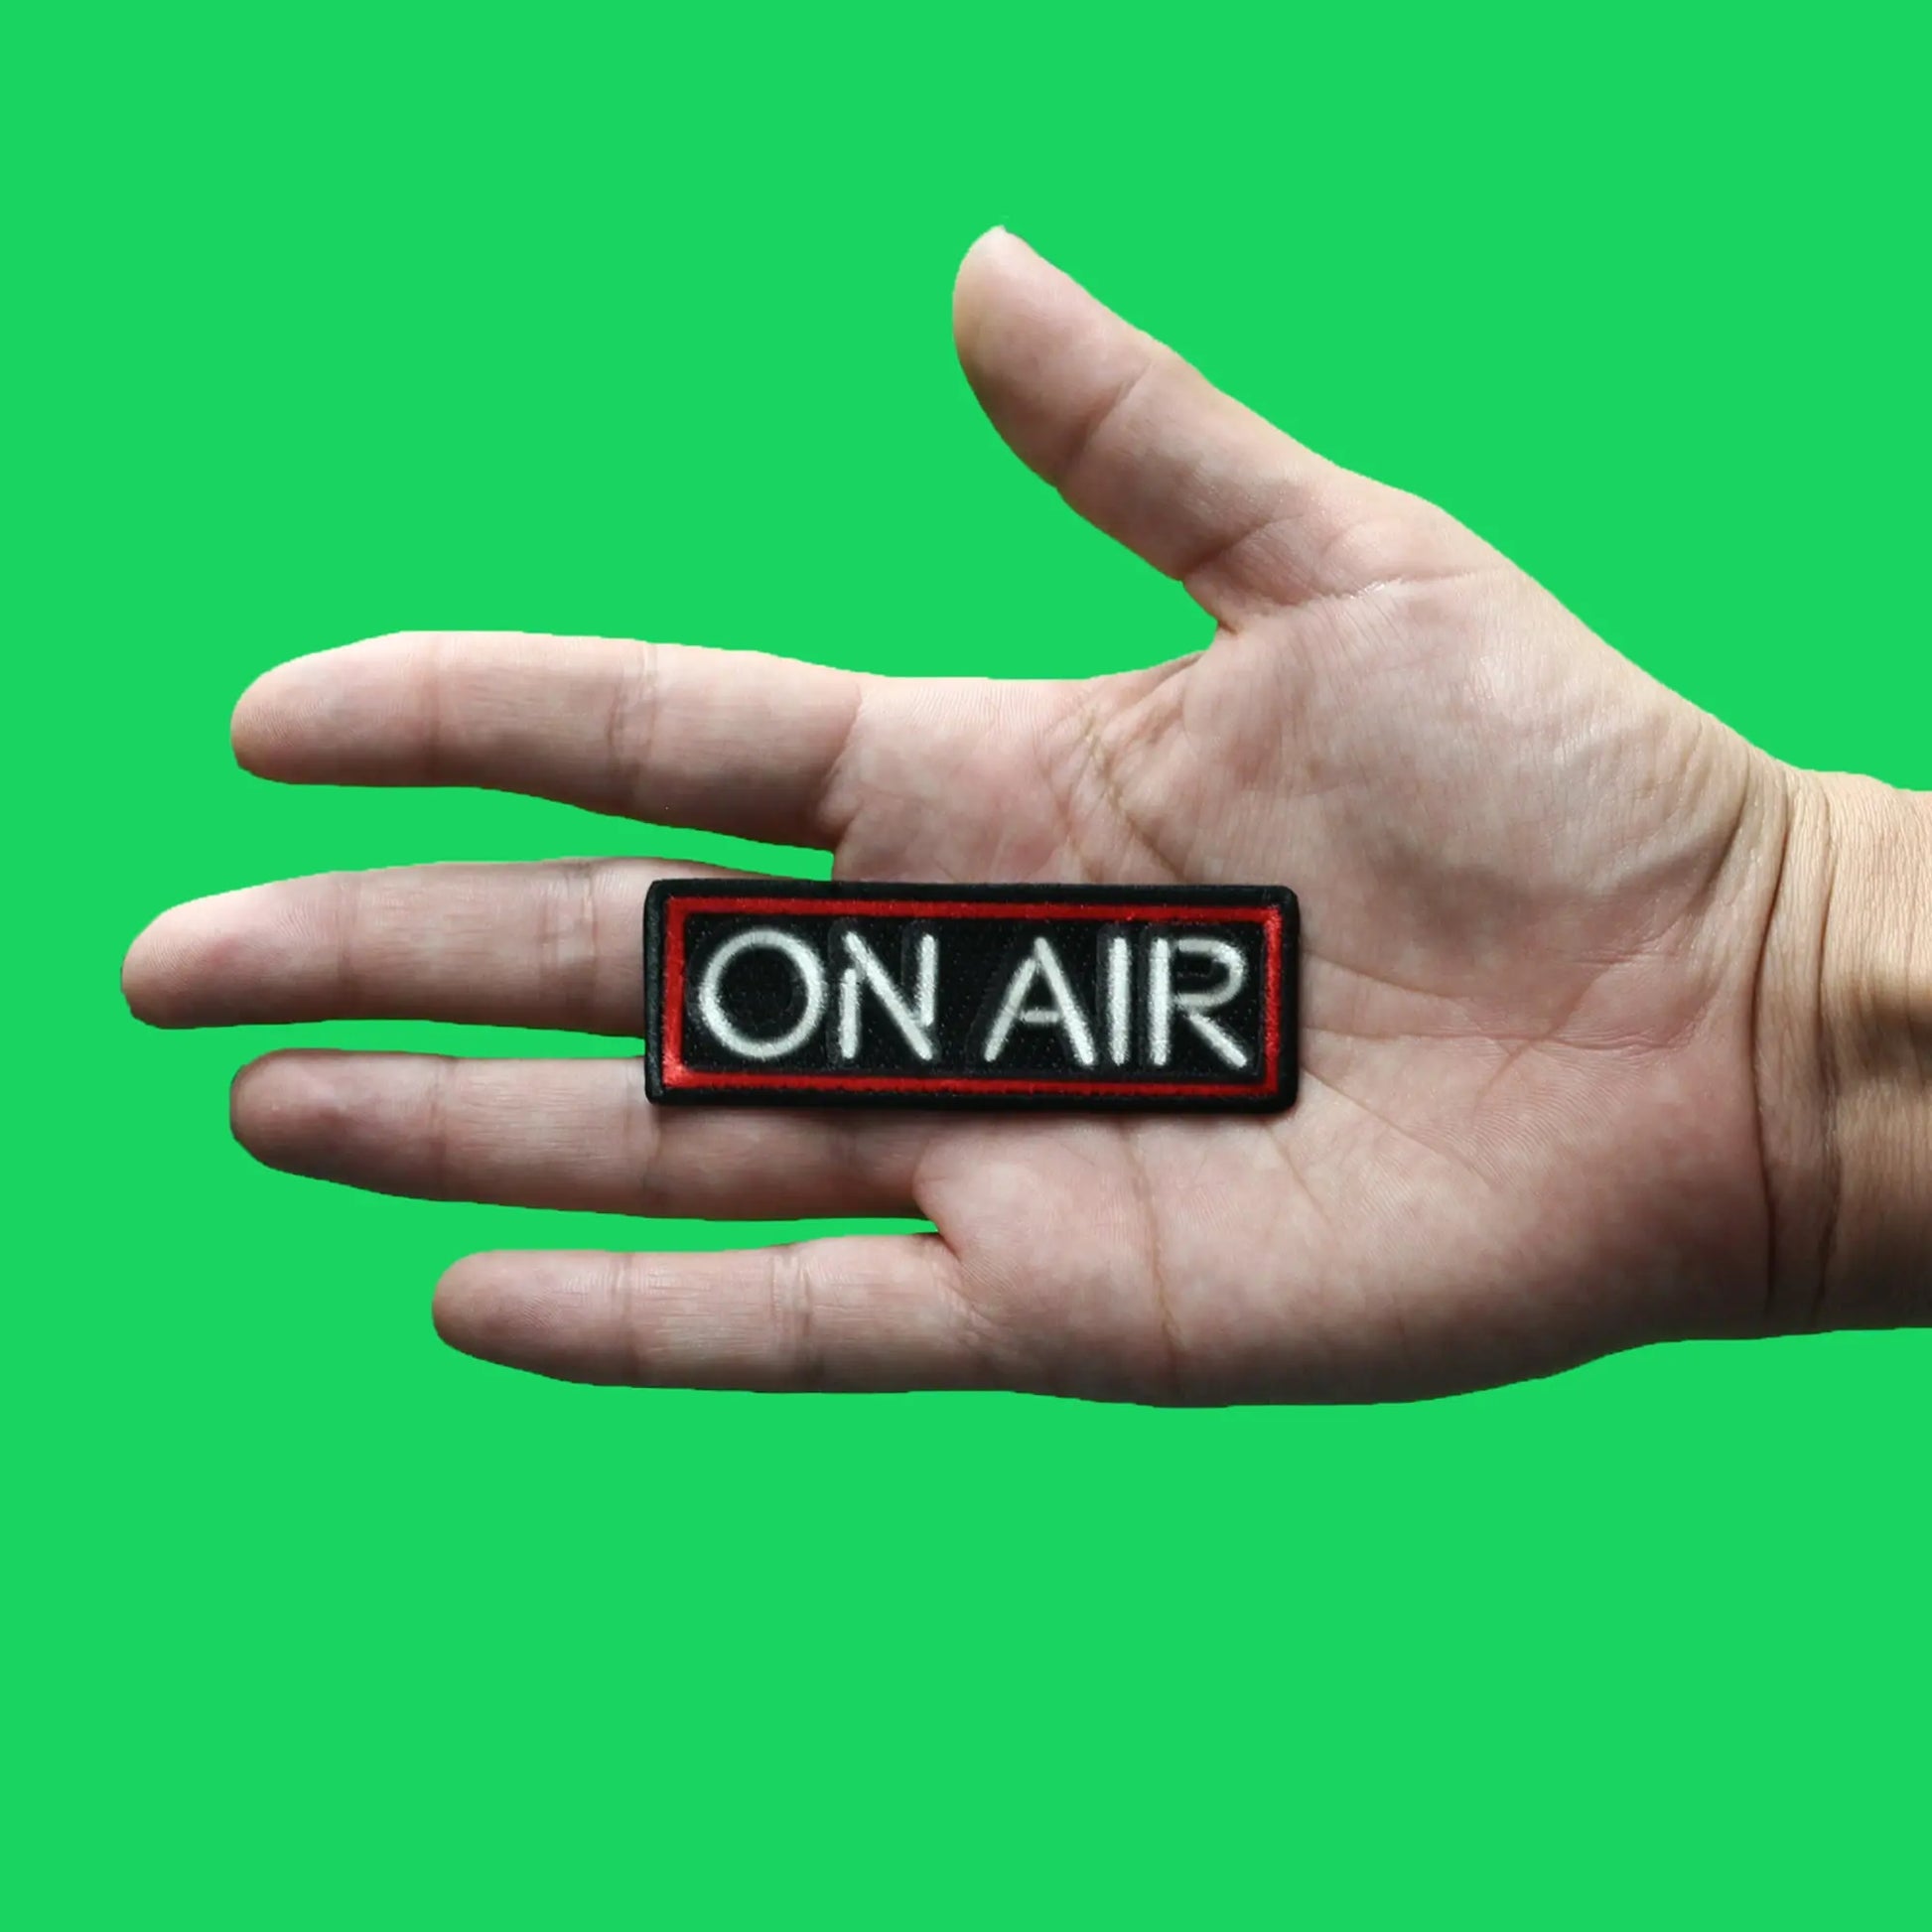 On Air Neon Sign Patch Live Radio Sublimated Embroidery Iron On